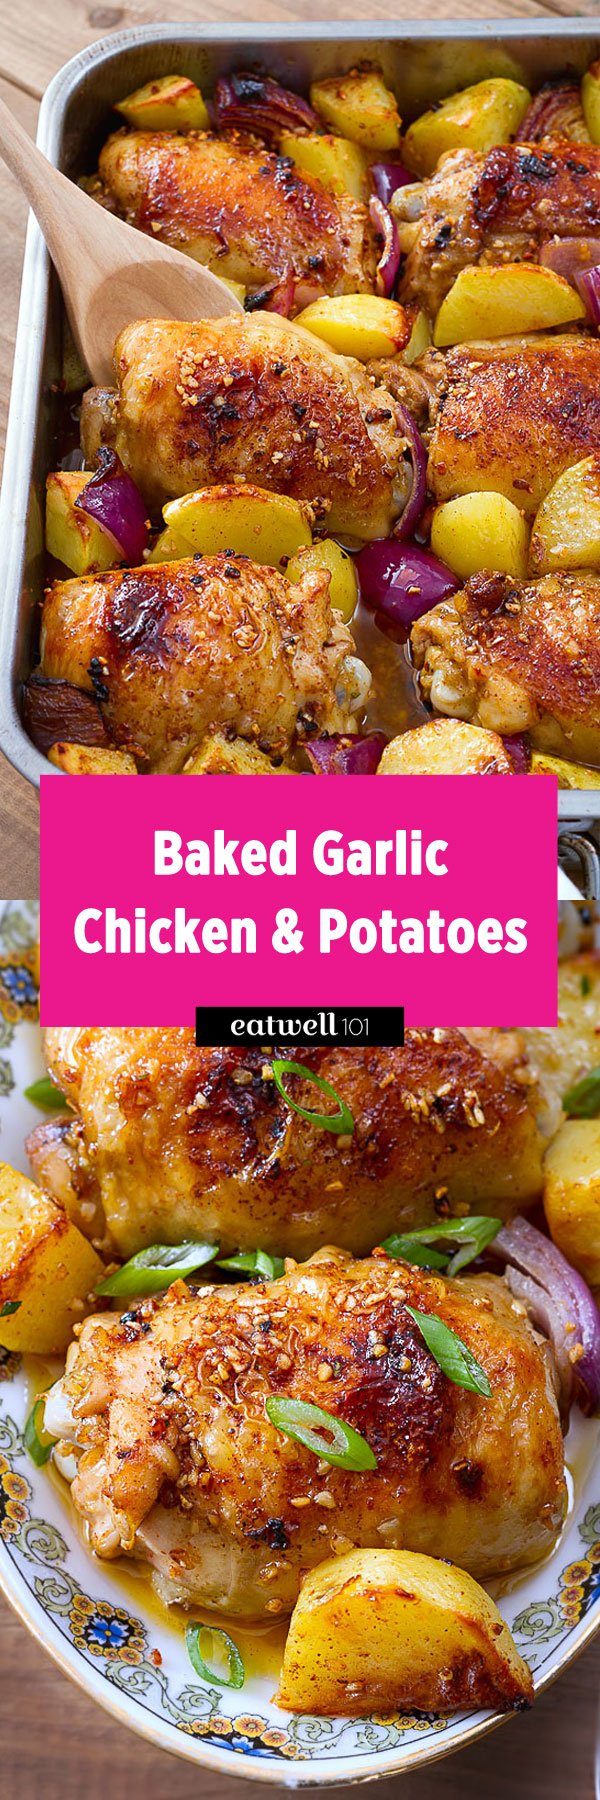 Baked Chicken and Potatoes Recipe – #eatwell101 #recipe Baked to absolute crisp-tender, juicy perfection! The most flavorful #chicken and #Potatoes you will ever make!